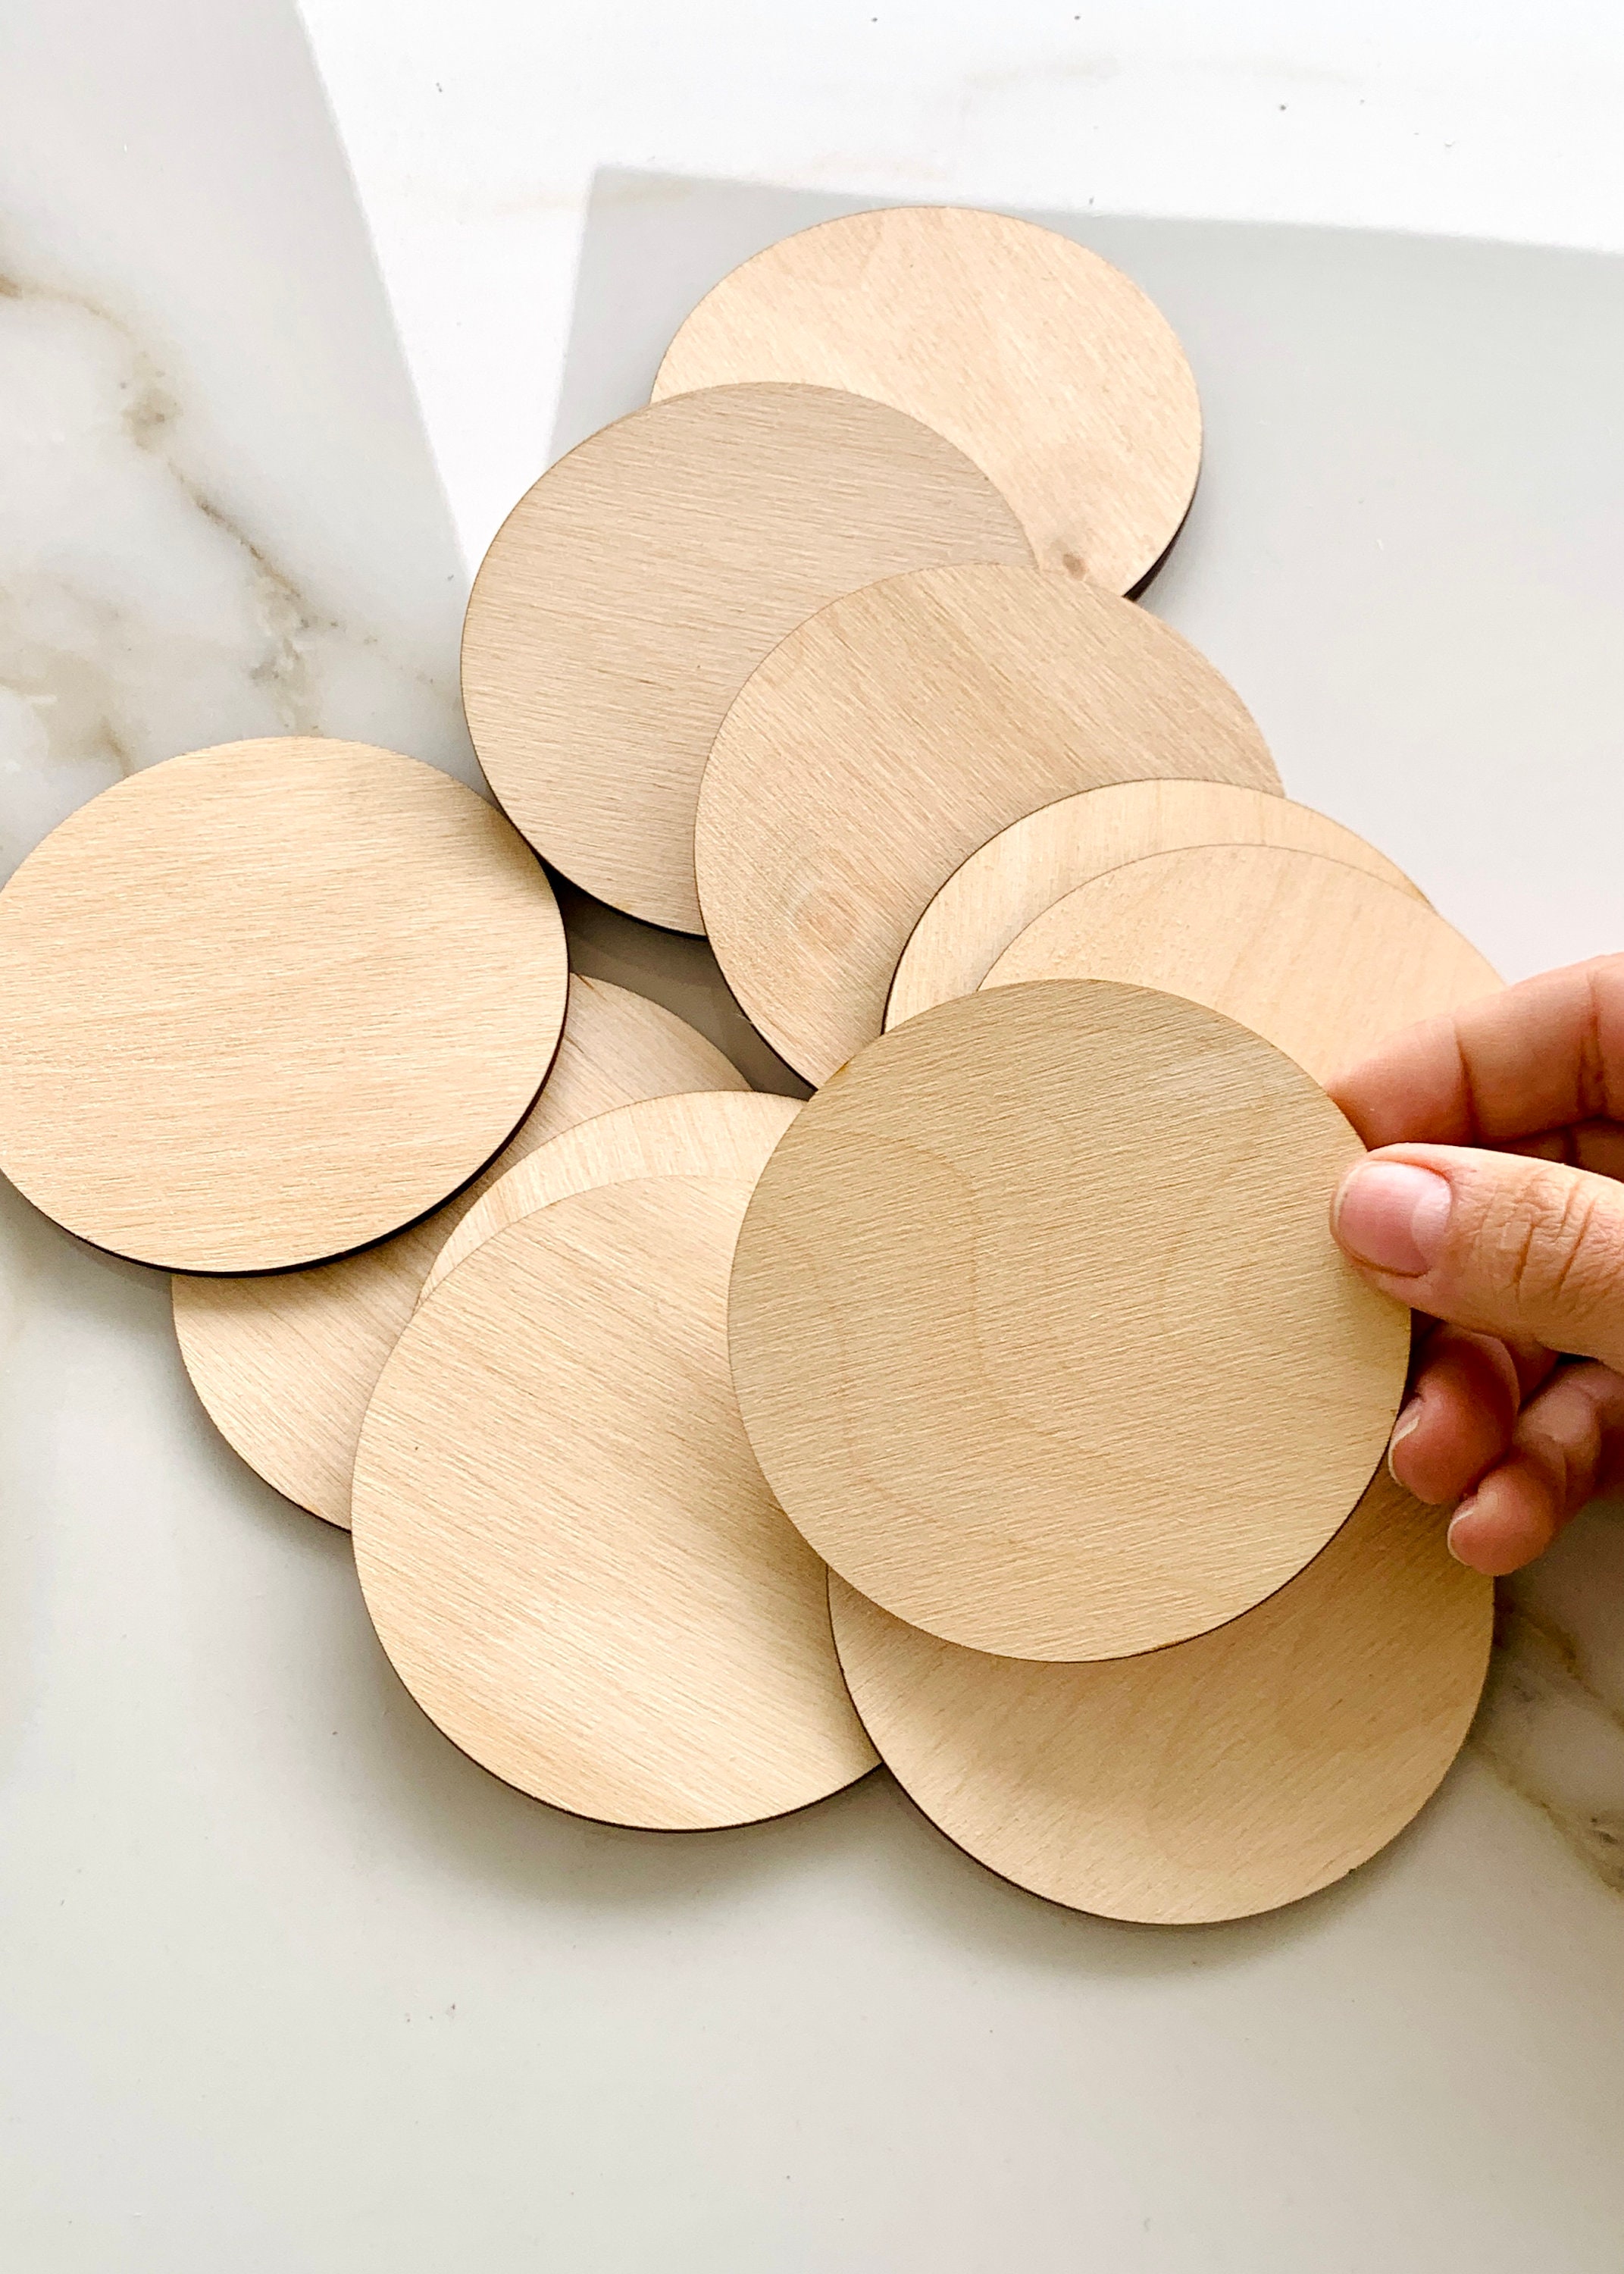 Circle Wood Sheets Solid Wood Round Disc DIY Craft Blanks Wooden Plate  Coasters